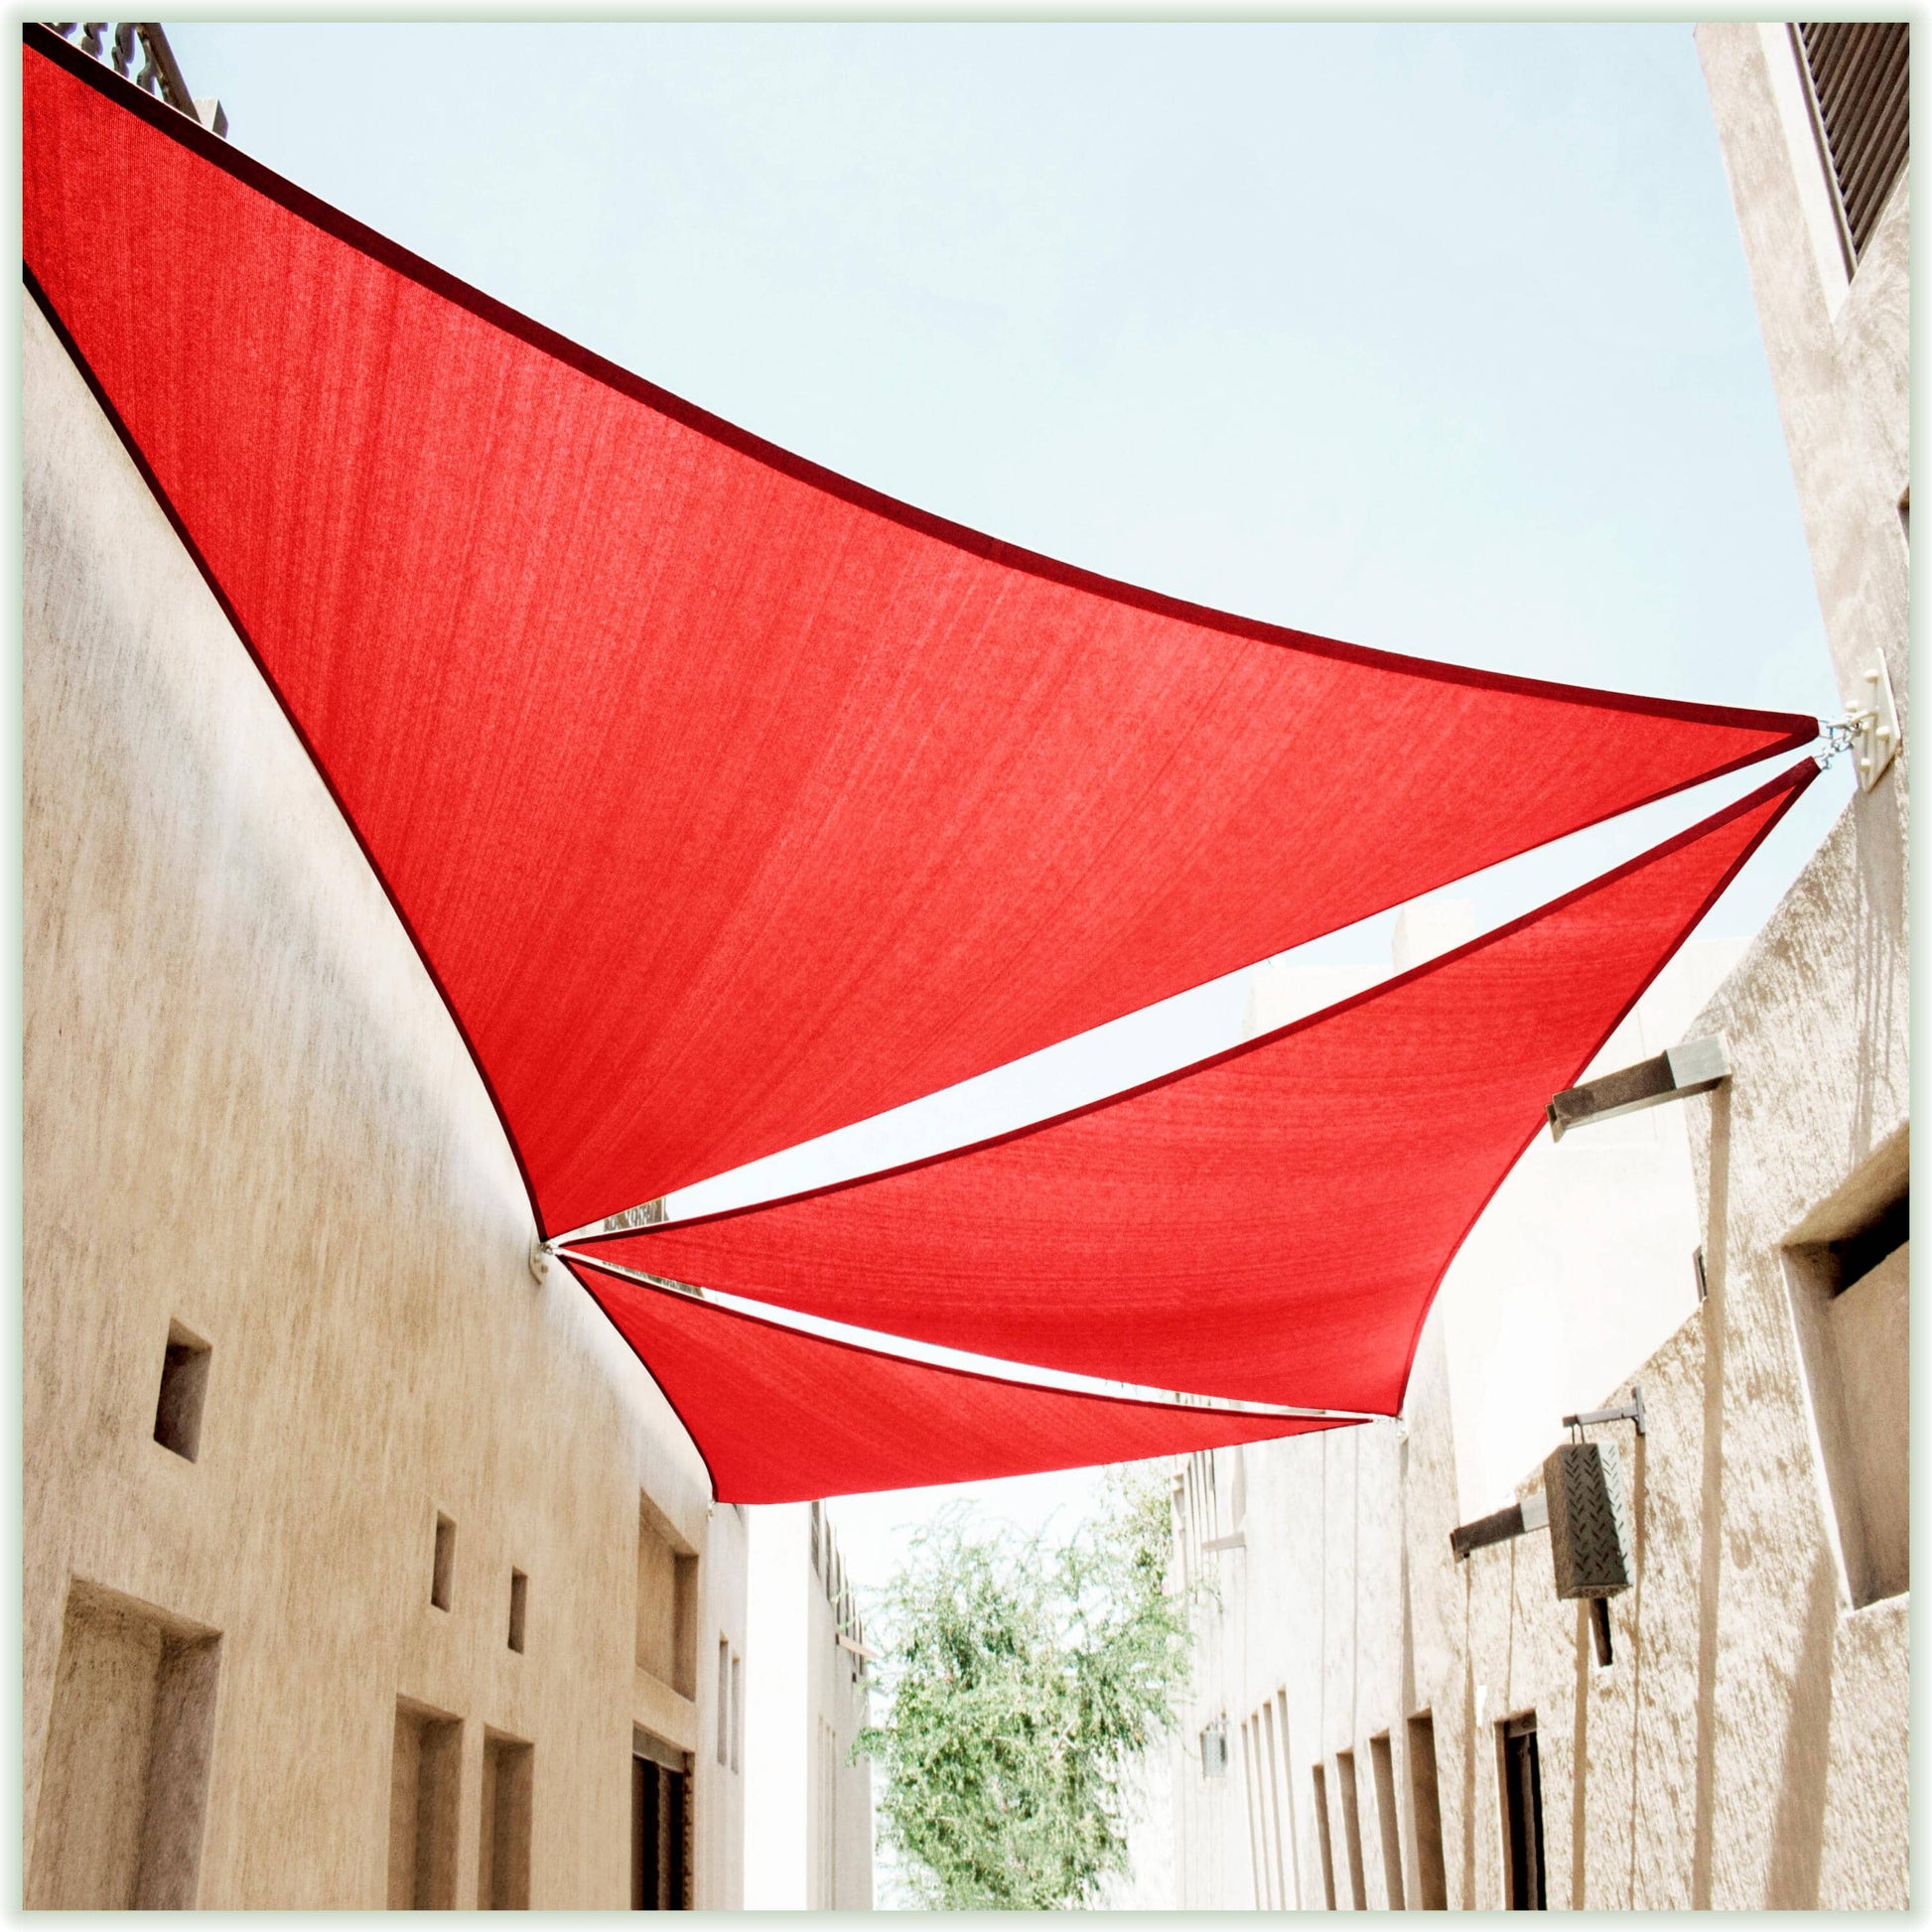 Equilateral Triangle Sun Shade Sail Canopy, Commercial Grade, 11 Sizes, 8 Colors Sun Shade Sail Colourtree 8' x 8' x 8' Red 